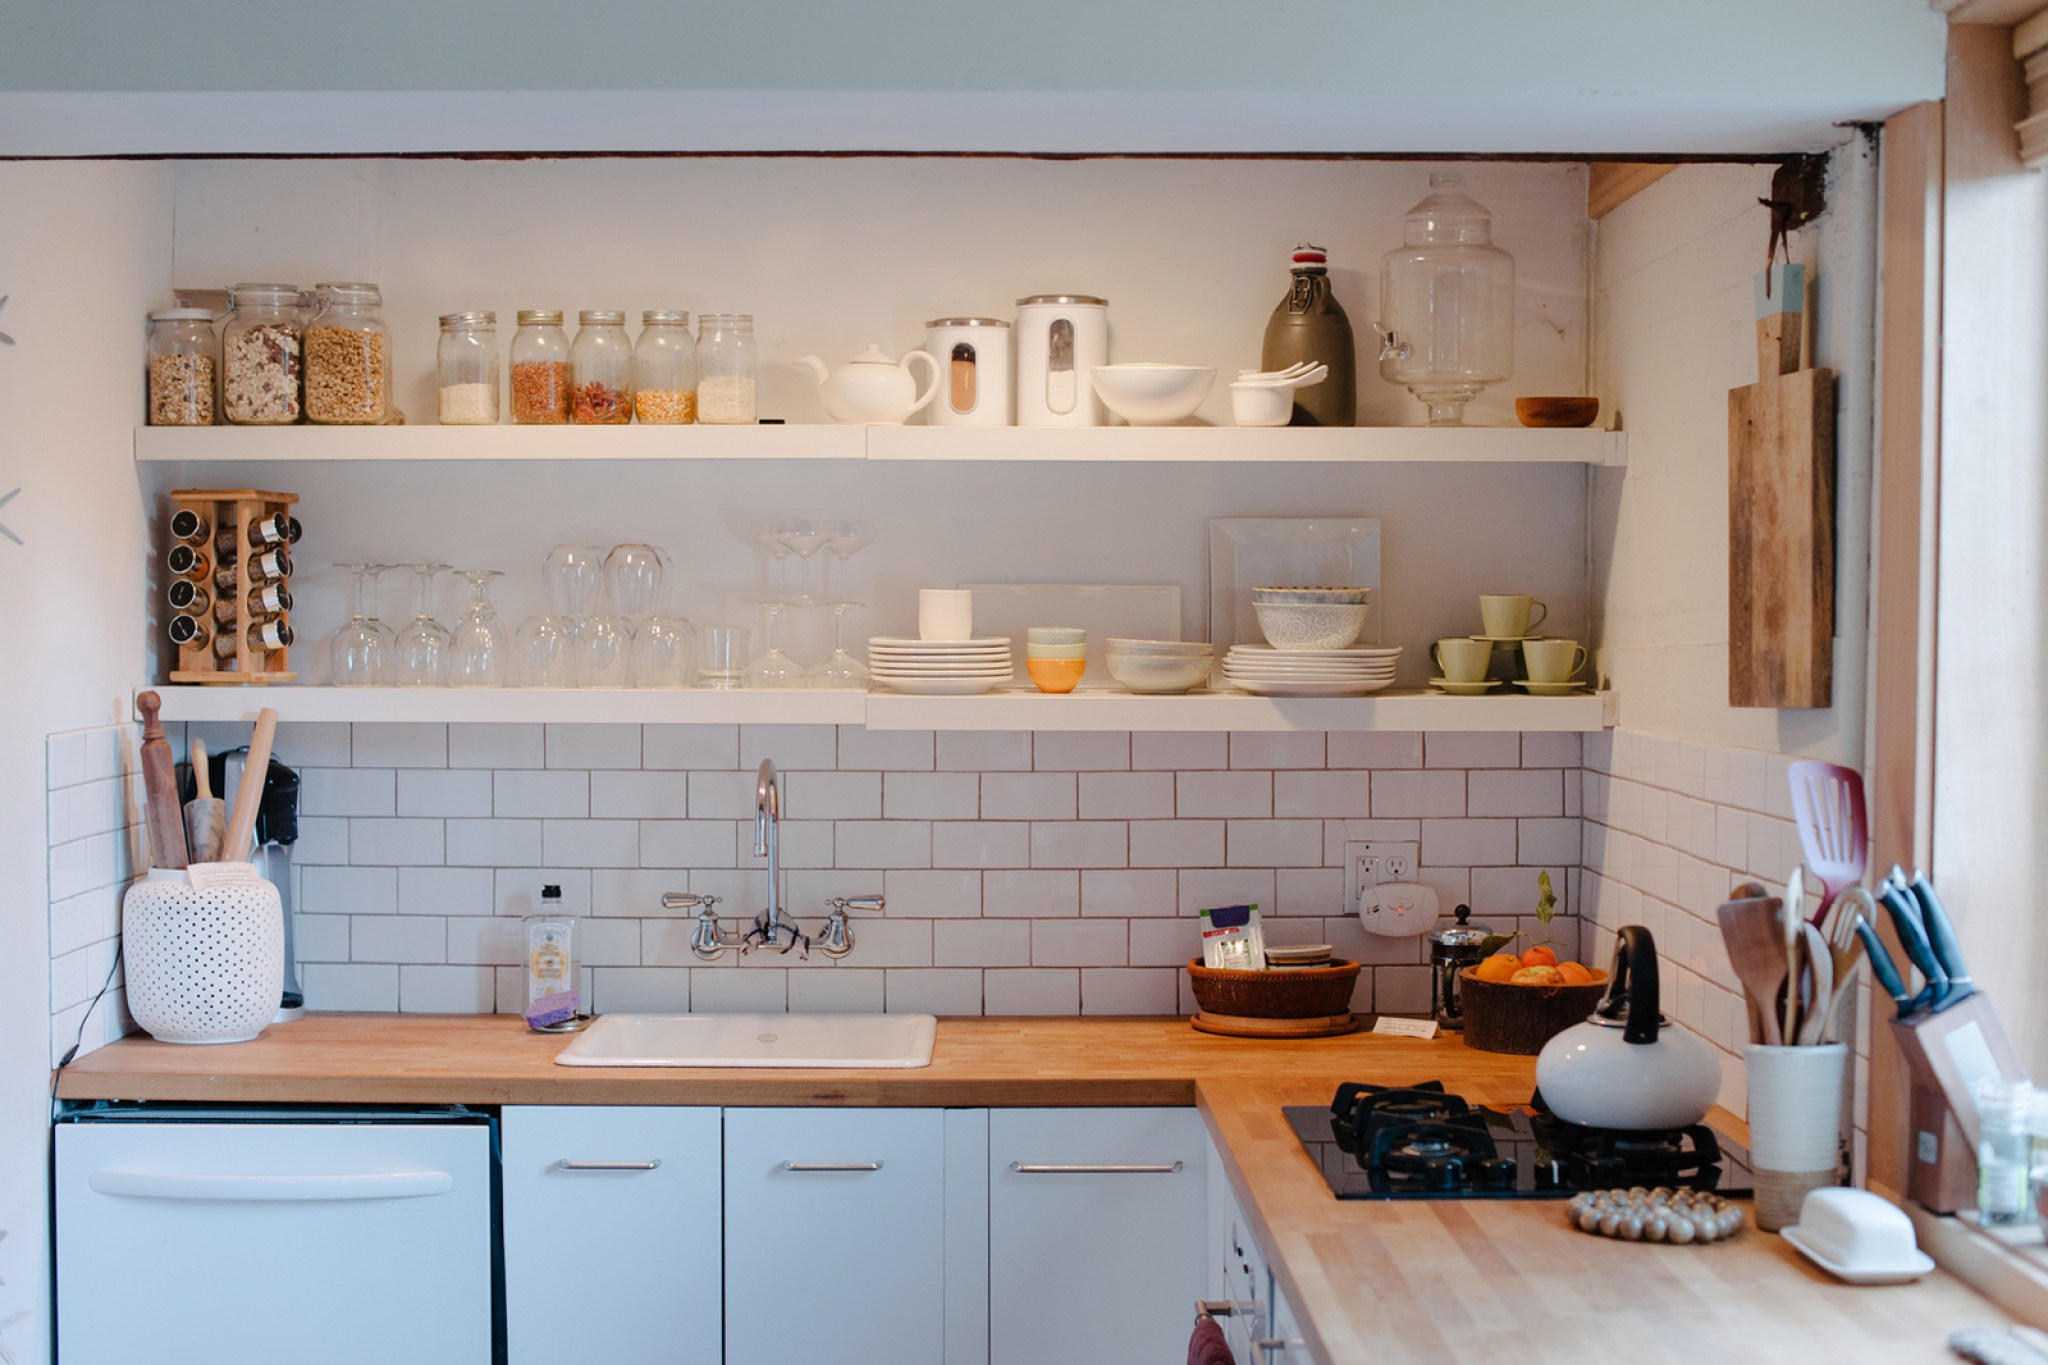 Kitchen Planning: The Importance of Trash